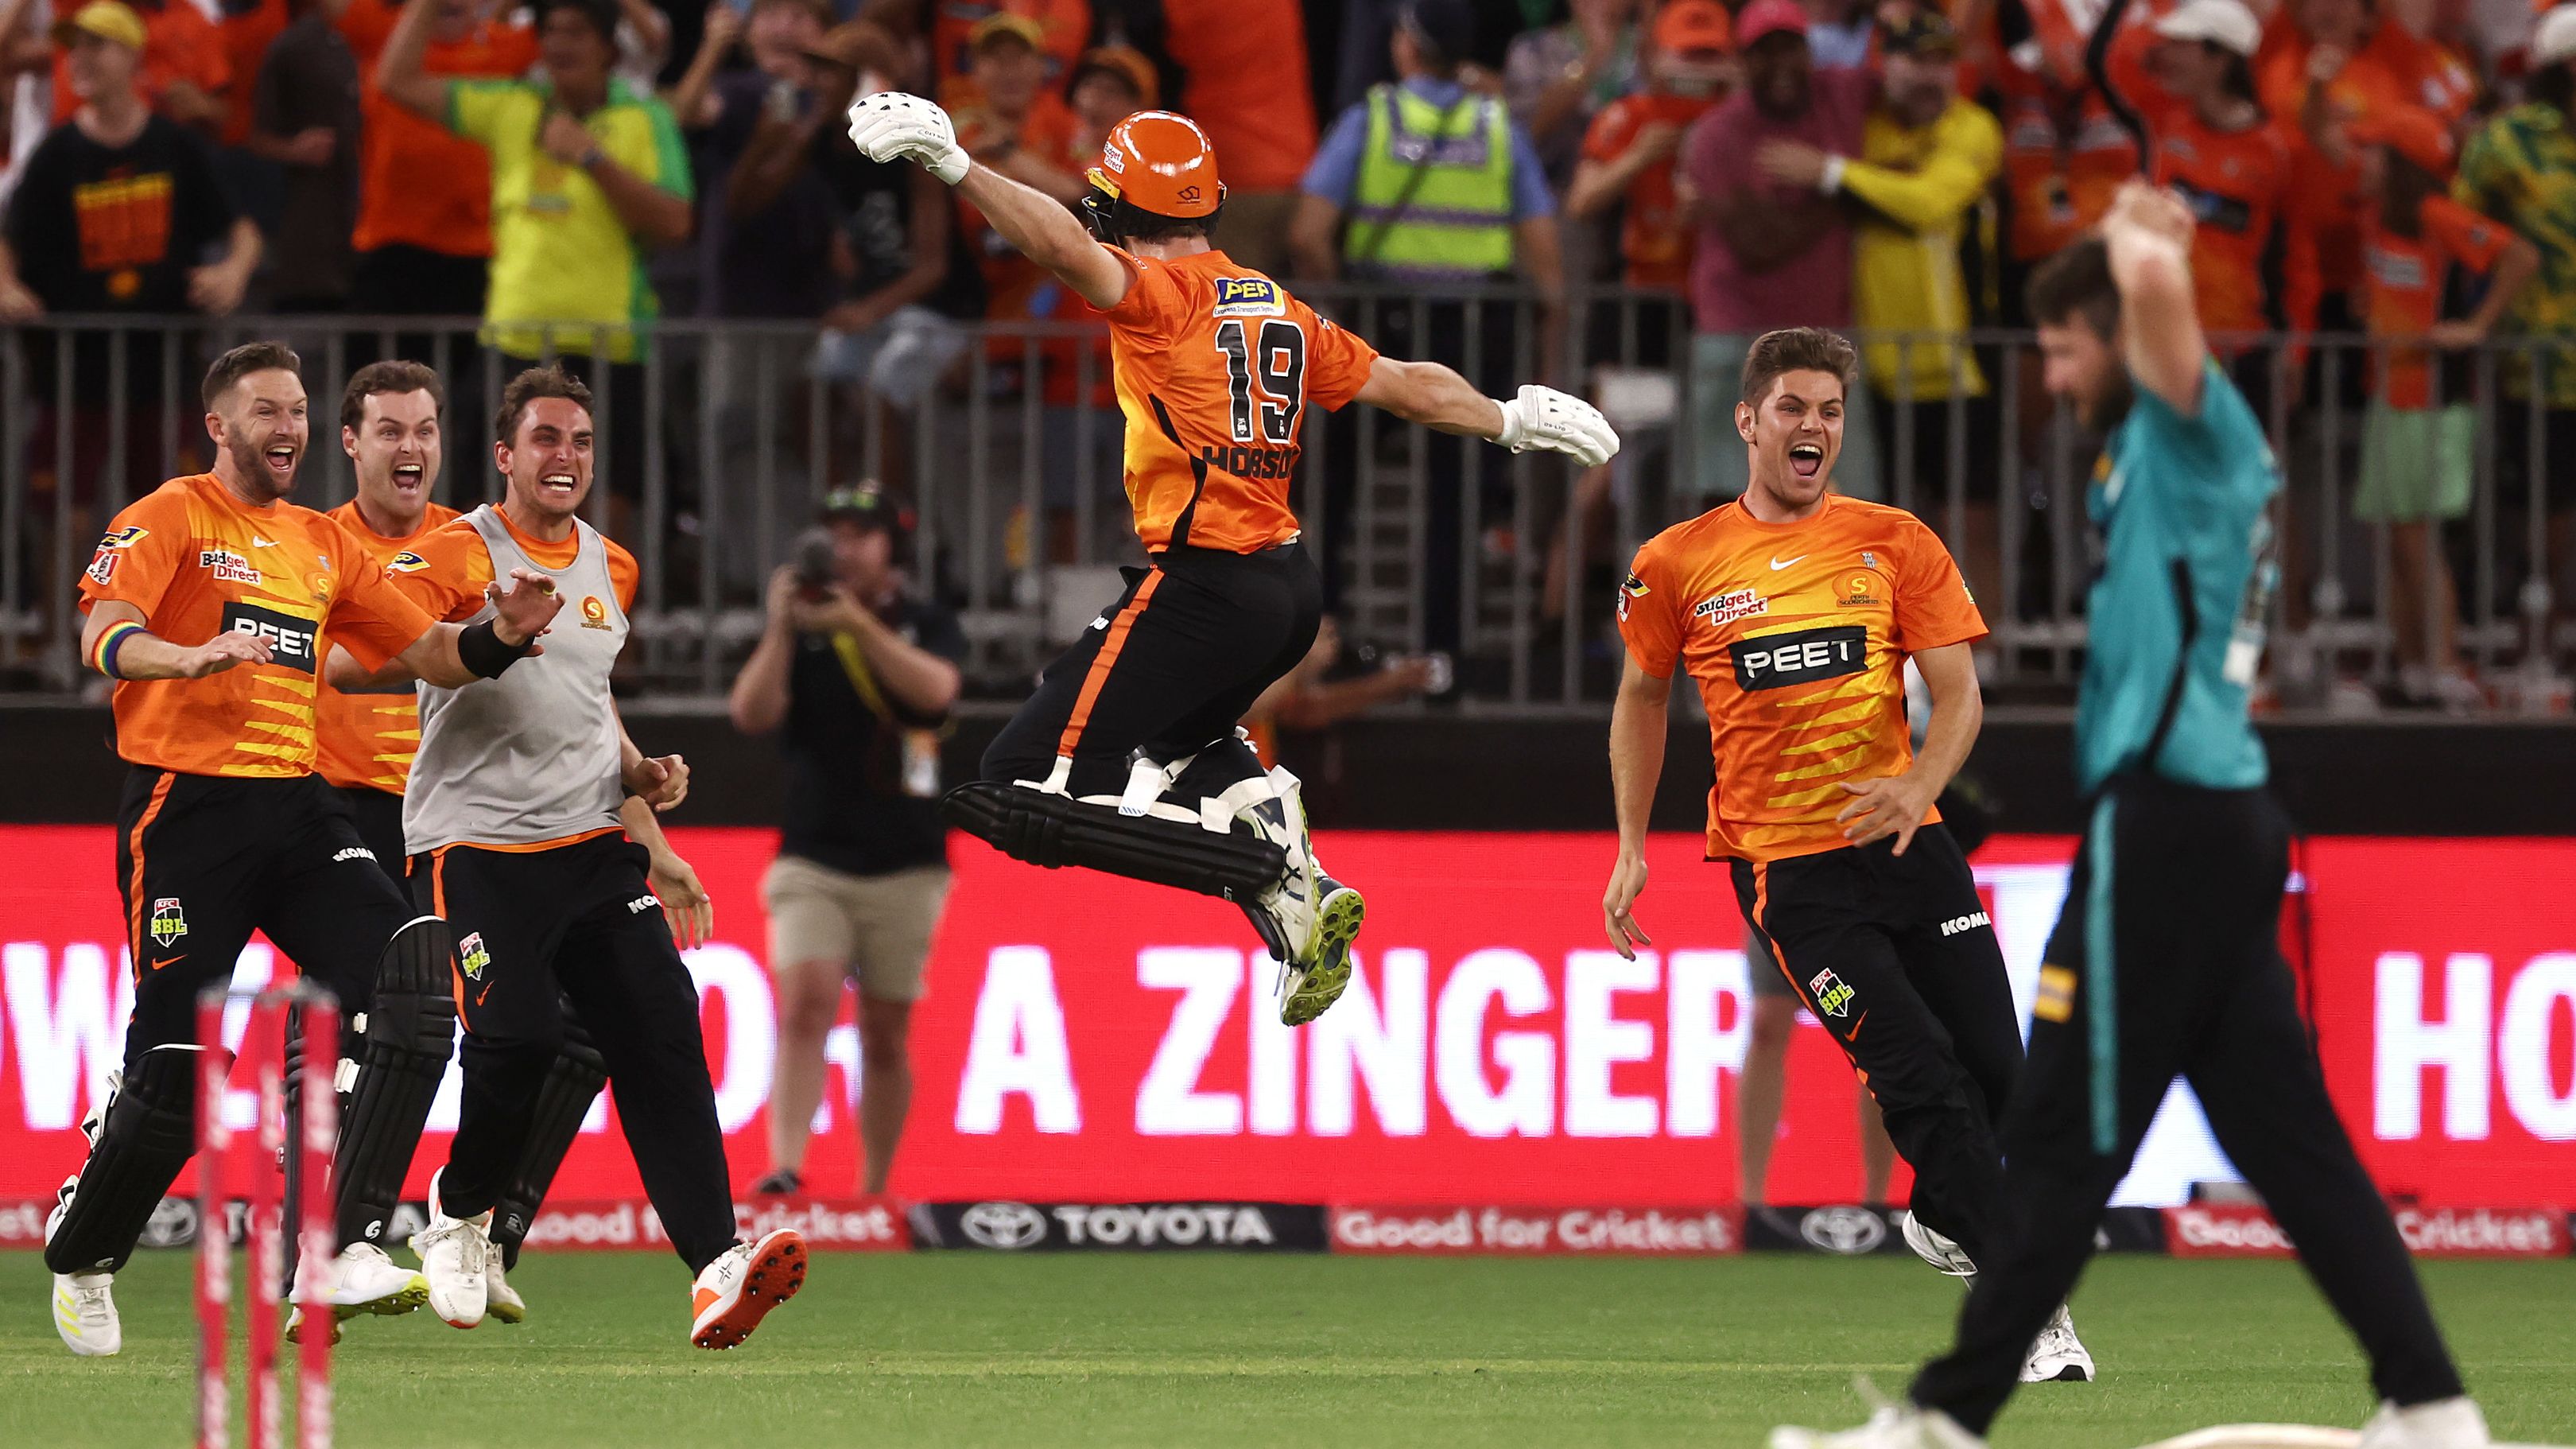 Perth Scorchers snag victory from jaws of defeat to beat Brisbane Heat in front of record home crowd – Wide World of Sports